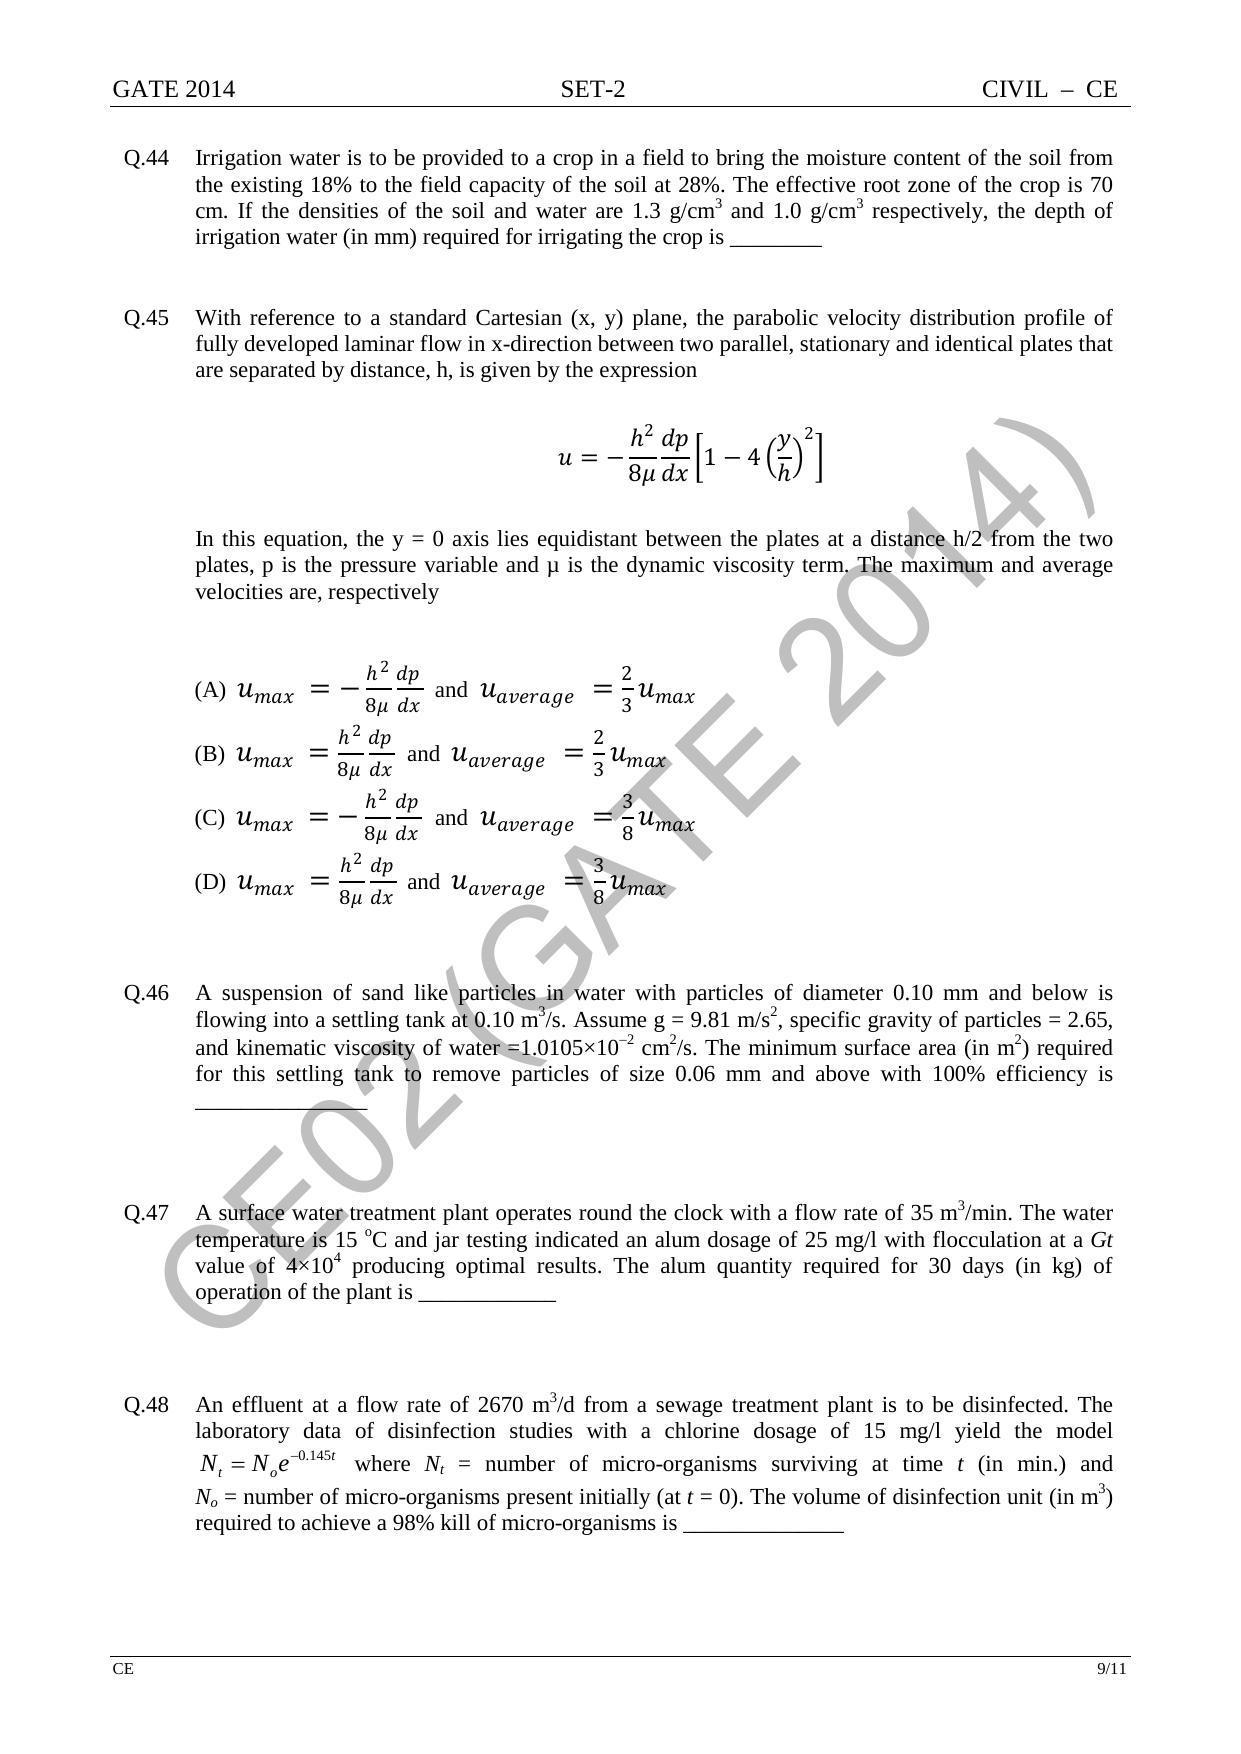 GATE 2014 Civil Engineering (CE) Question Paper with Answer Key - Page 37